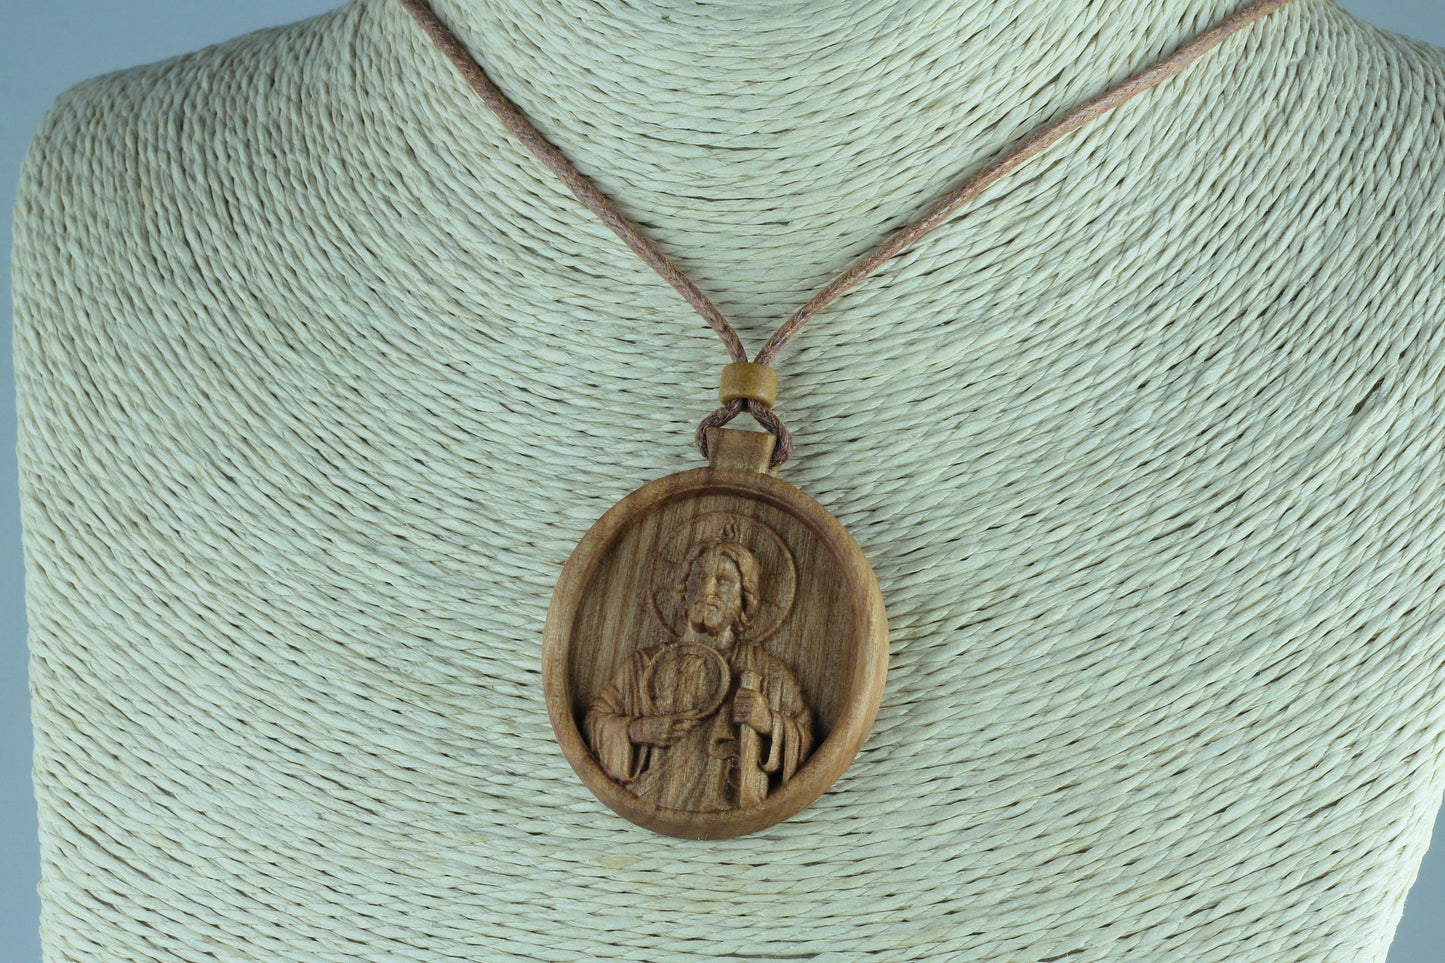 St Jude necklace, medallion, Wood necklace